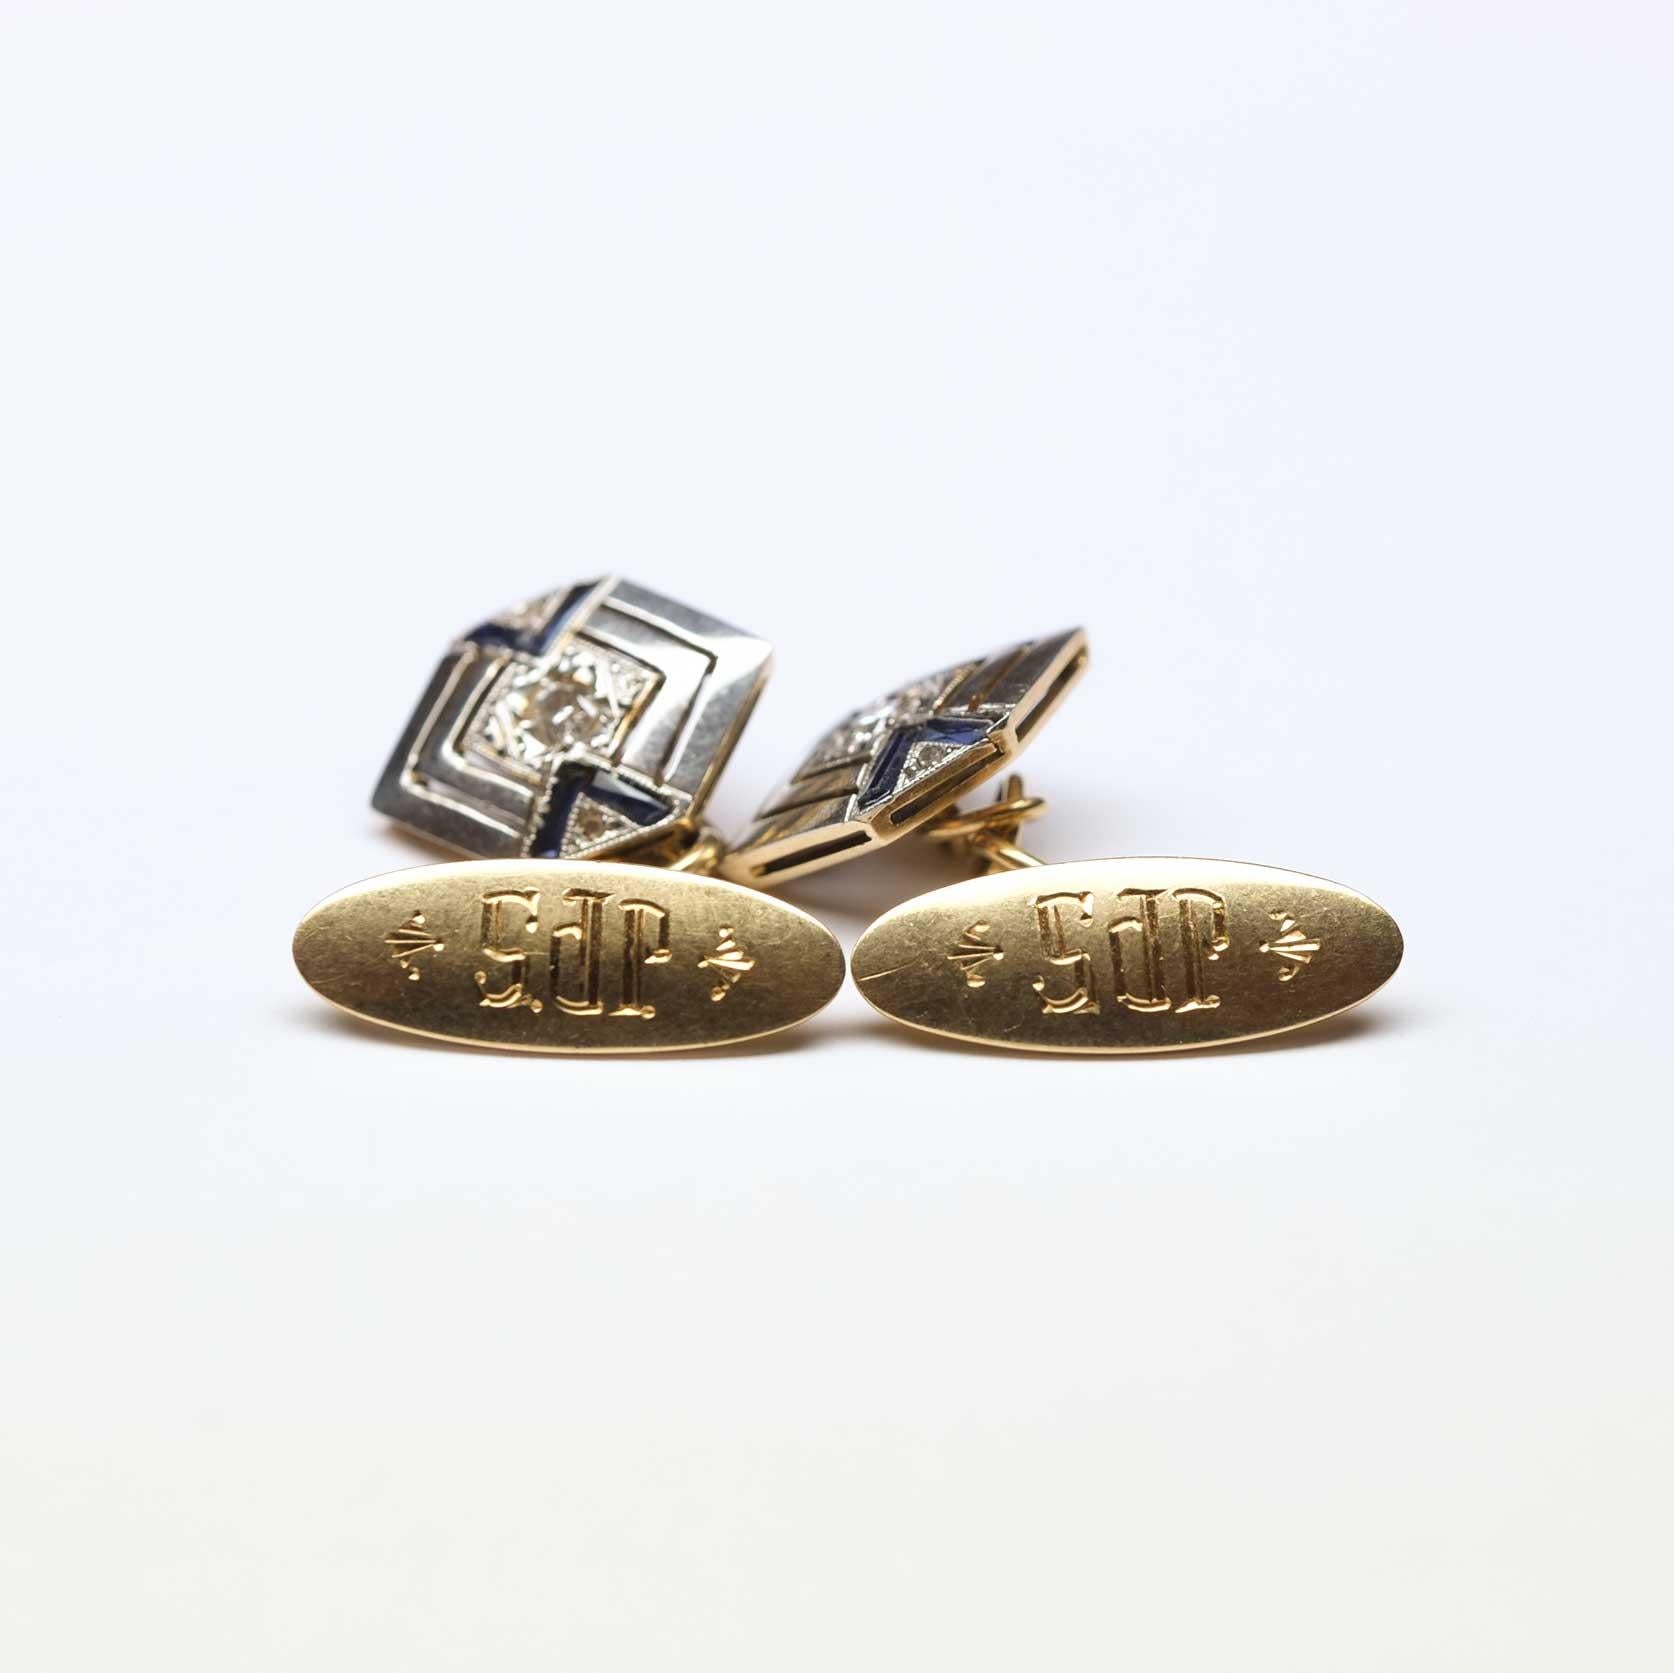 Deco period cufflinks (1920/30s), finely decorated and hand made set in gold and platinum. With rose cut diamonds and calibrated cut sapphires.

Highlights
- Deco period 1930s circa
- Decorated with rose cut diamonds and rubies
- Platinum and gold